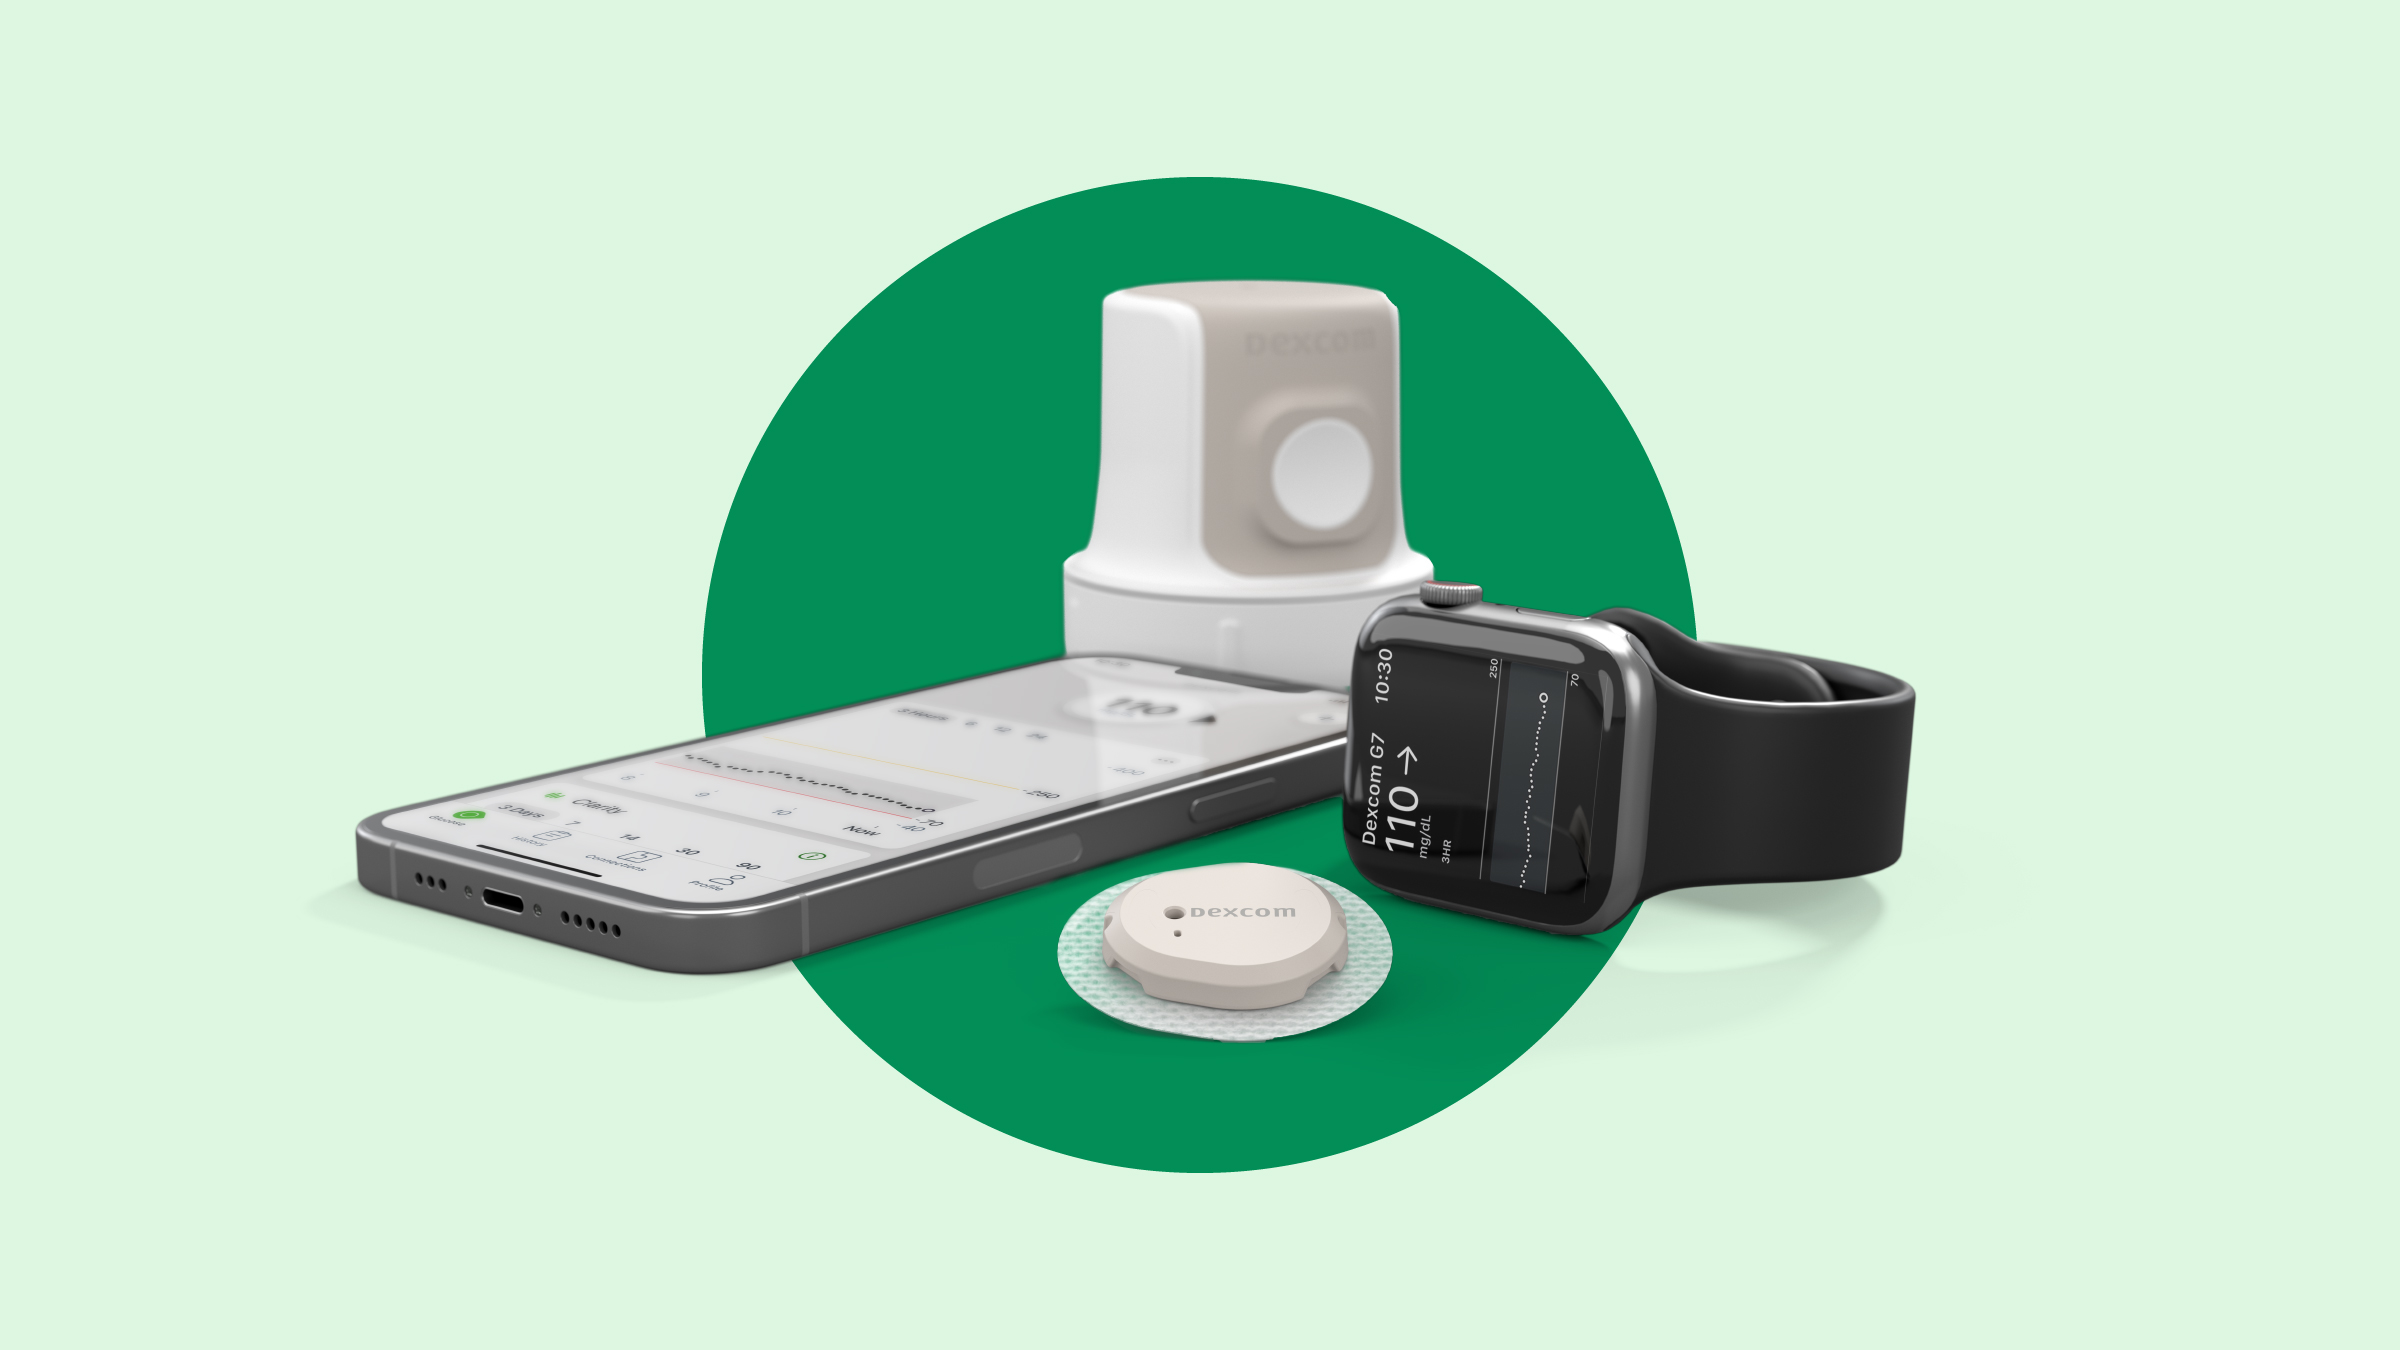 Different Types Of Dexcom G6 Sensors And How They Monitor Blood